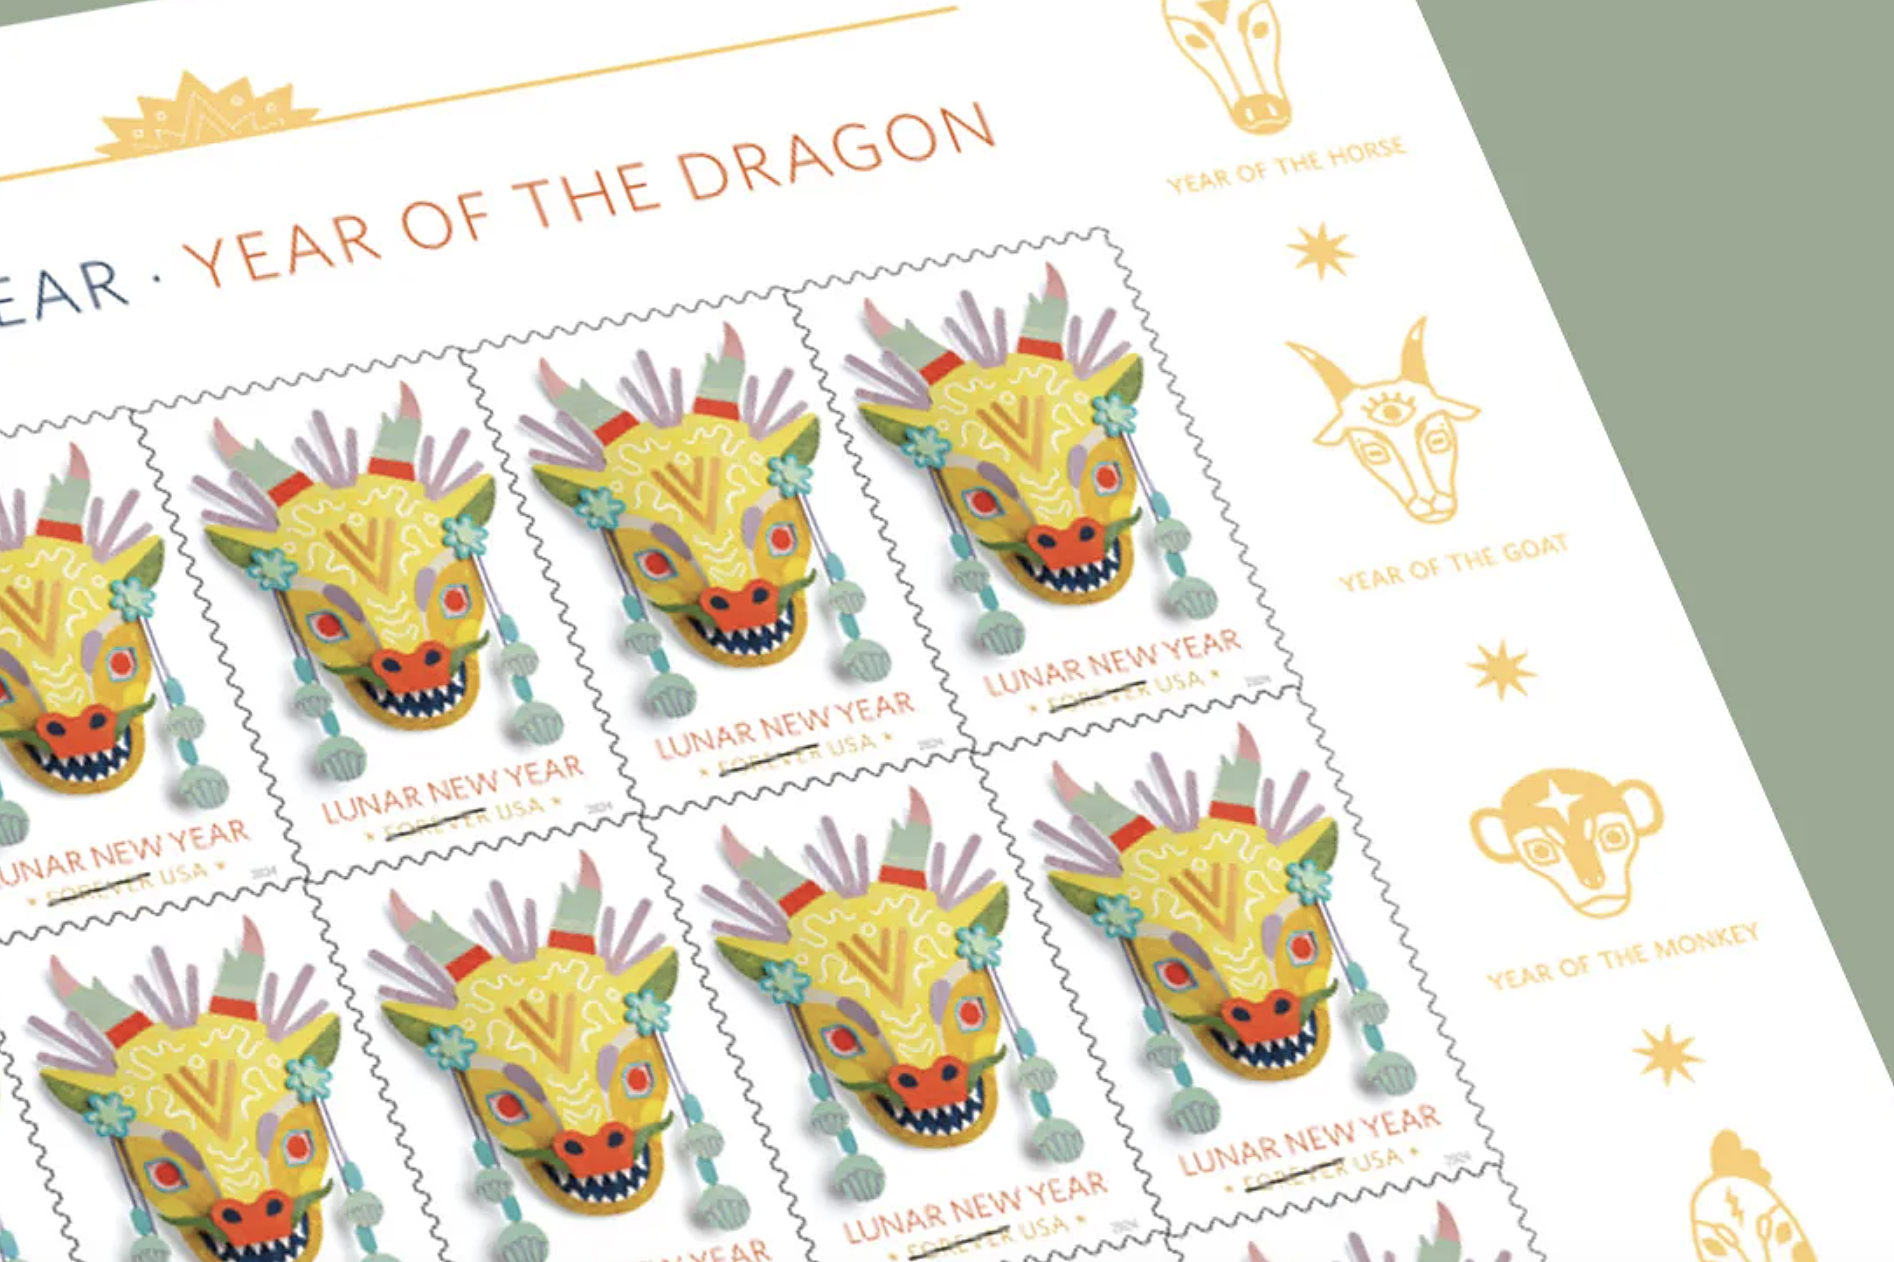 Chinese New Year Stamp USPS Dragon Sparks Criticism